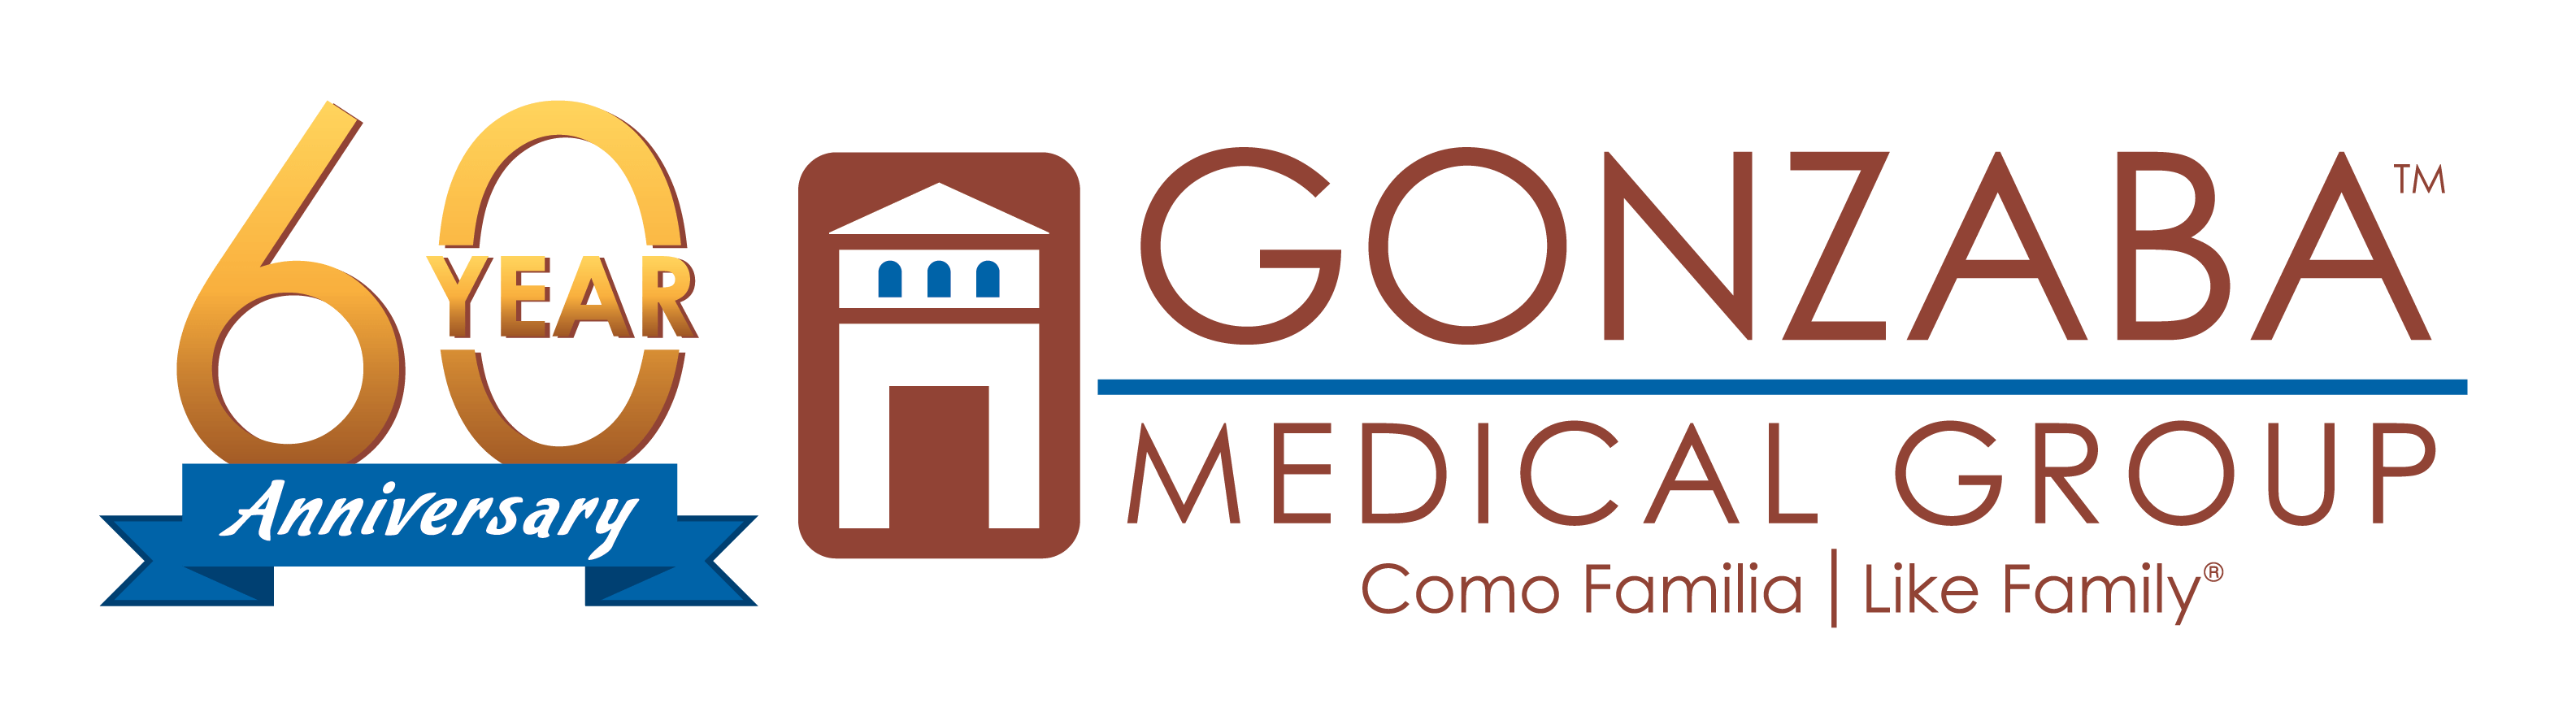 Gonzaba Medical Group - 60 Year Anniversary